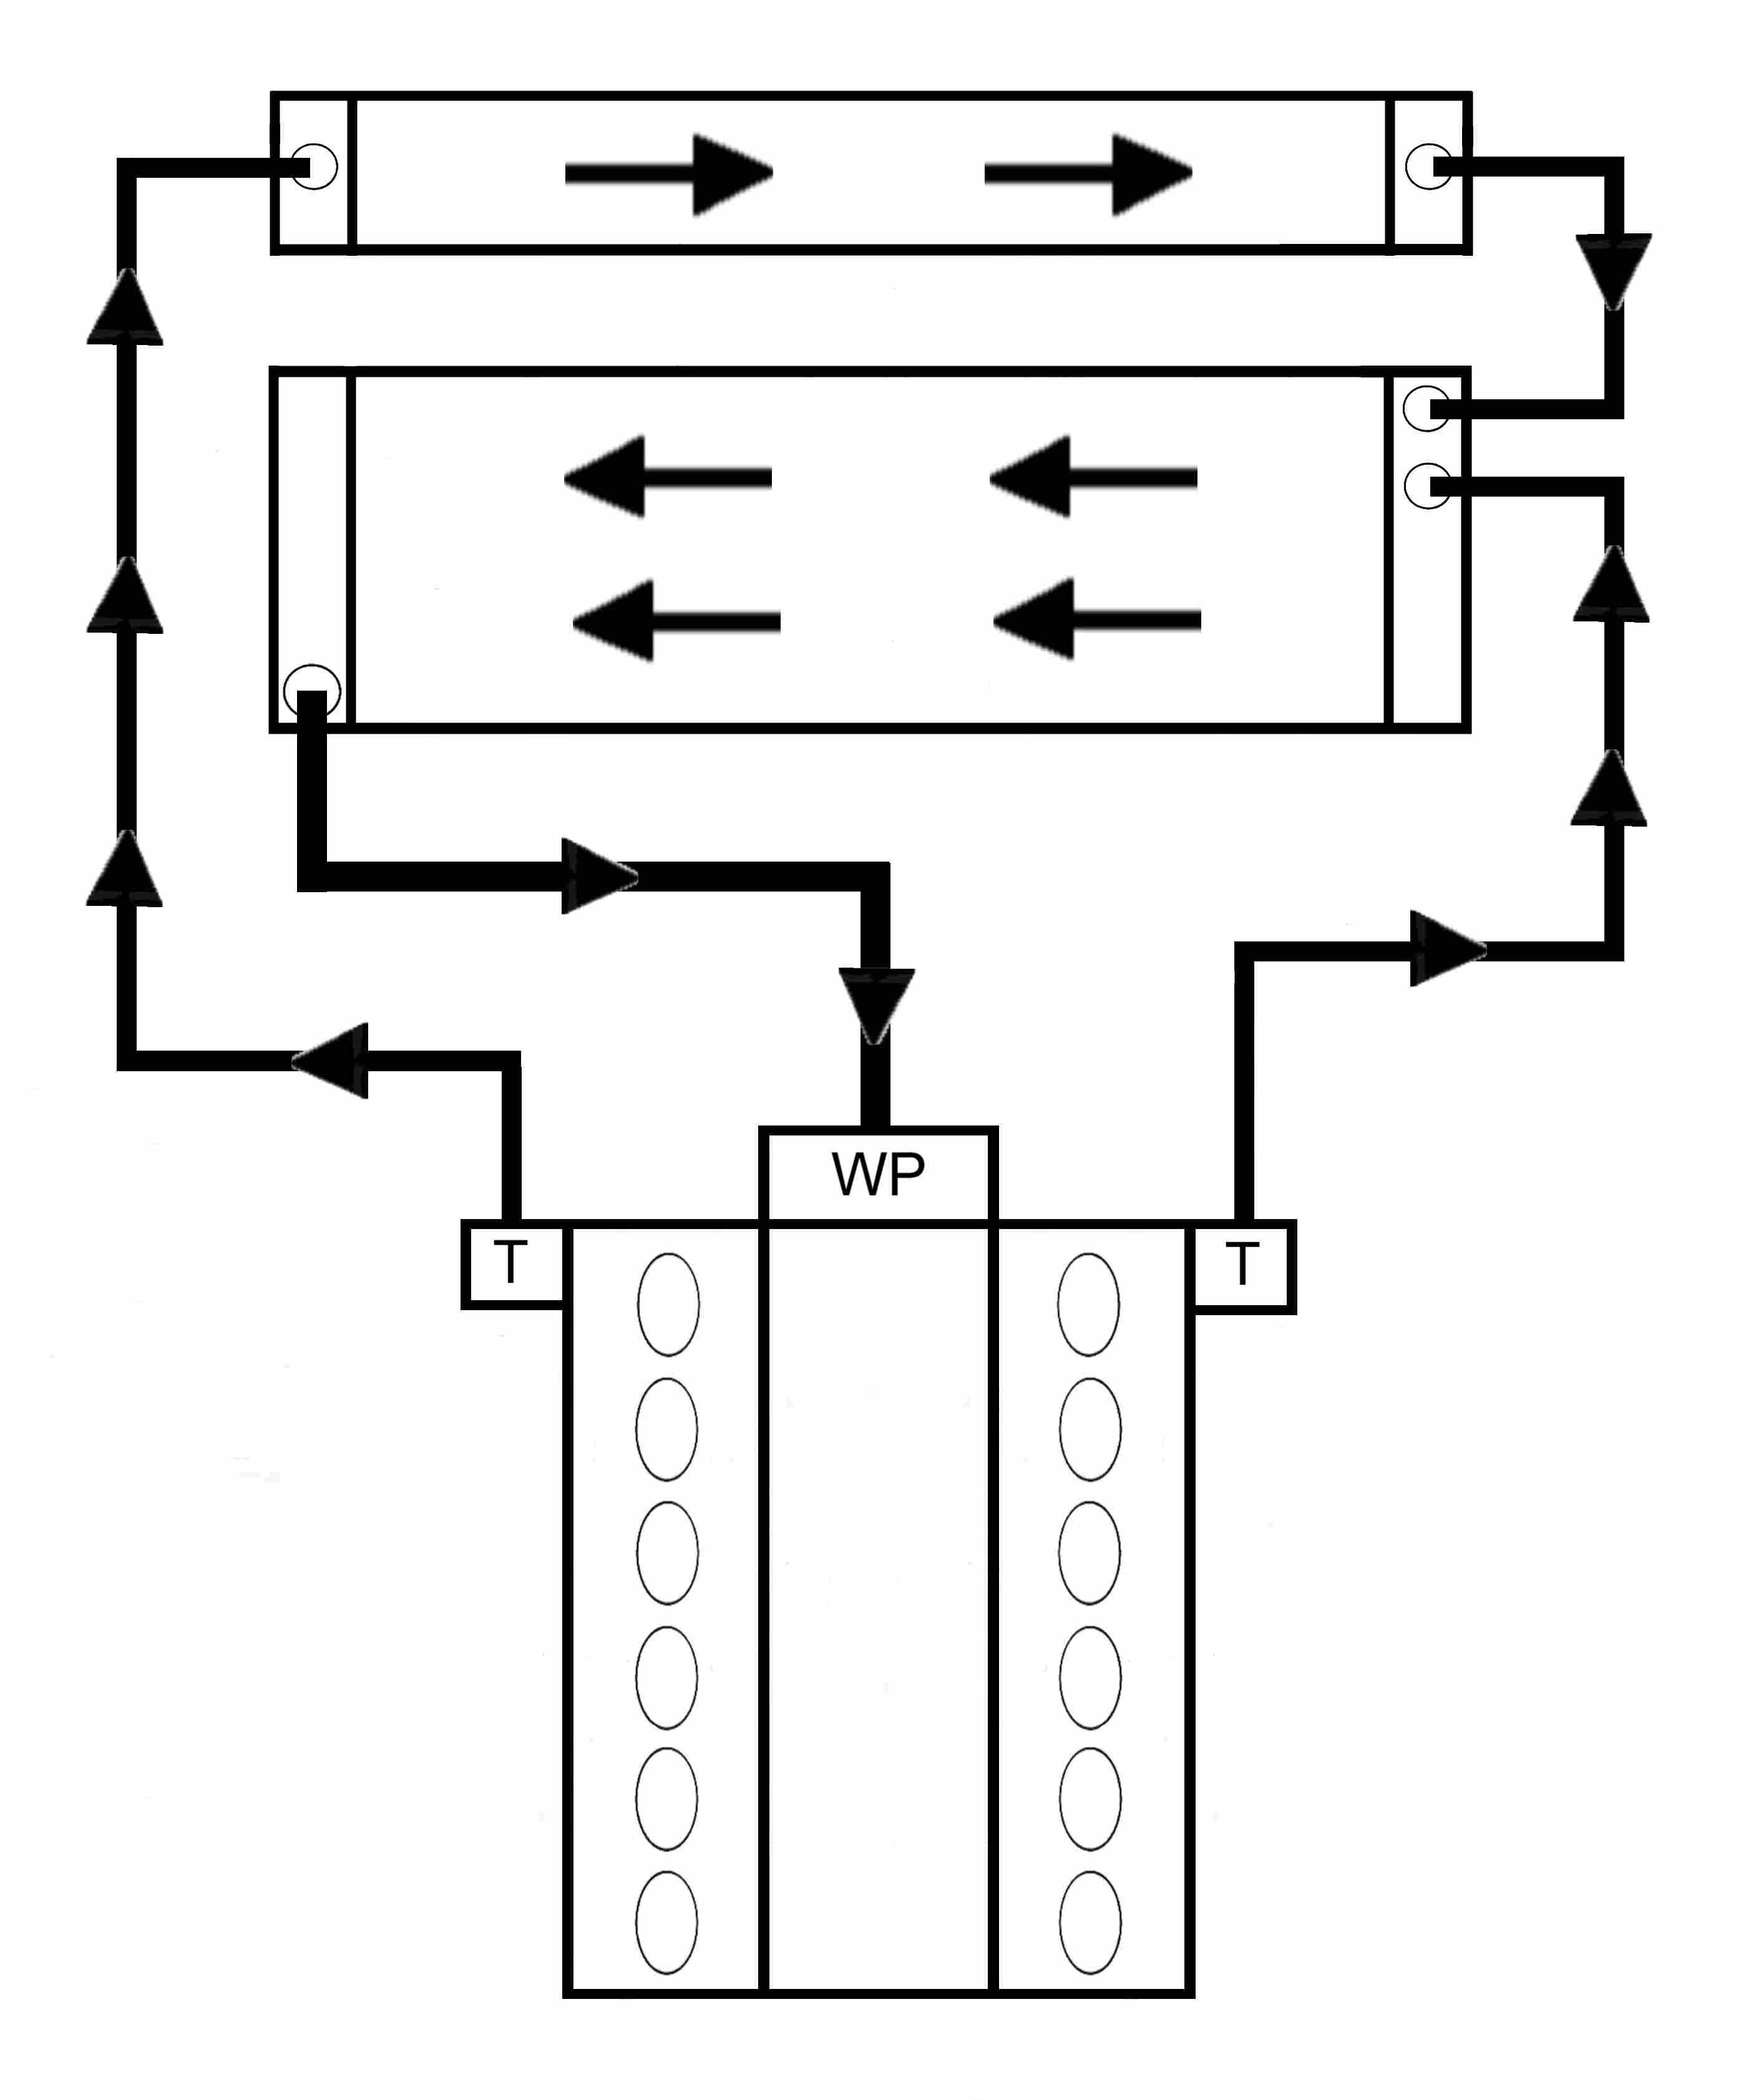 Fig. 3 An alternative way of looking at the XJ12/XJS cooling system